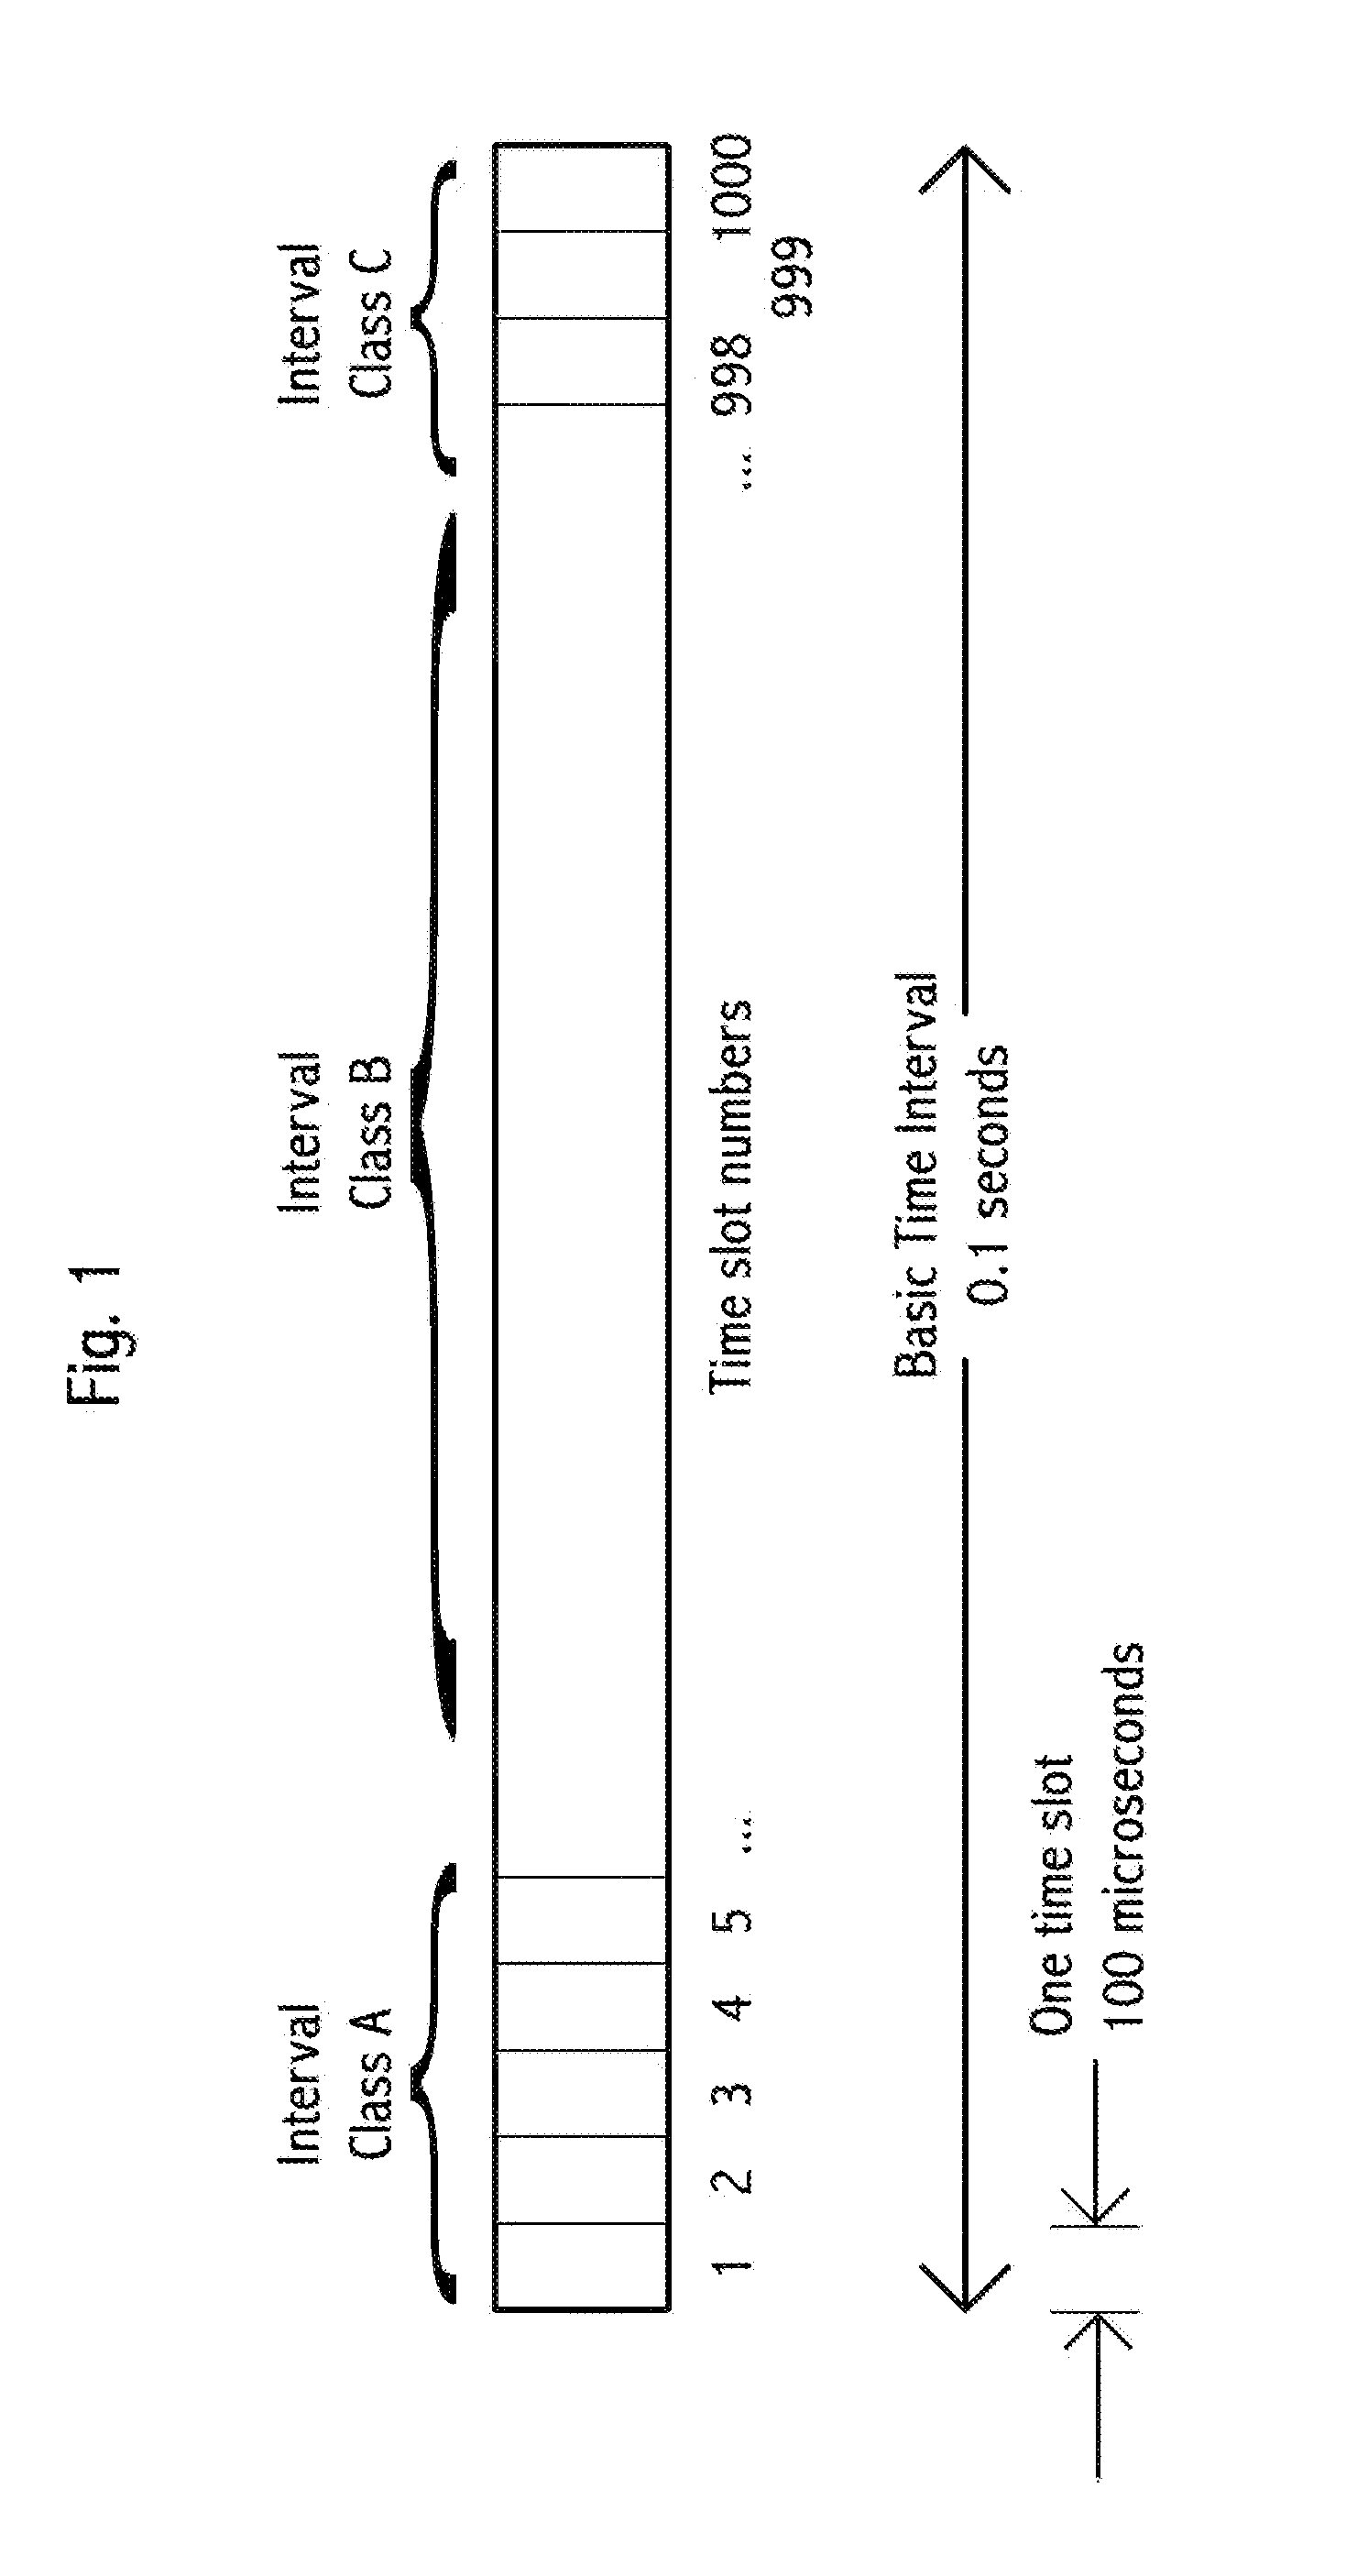 Generating a location in a vehicle-to-vehicle communication system